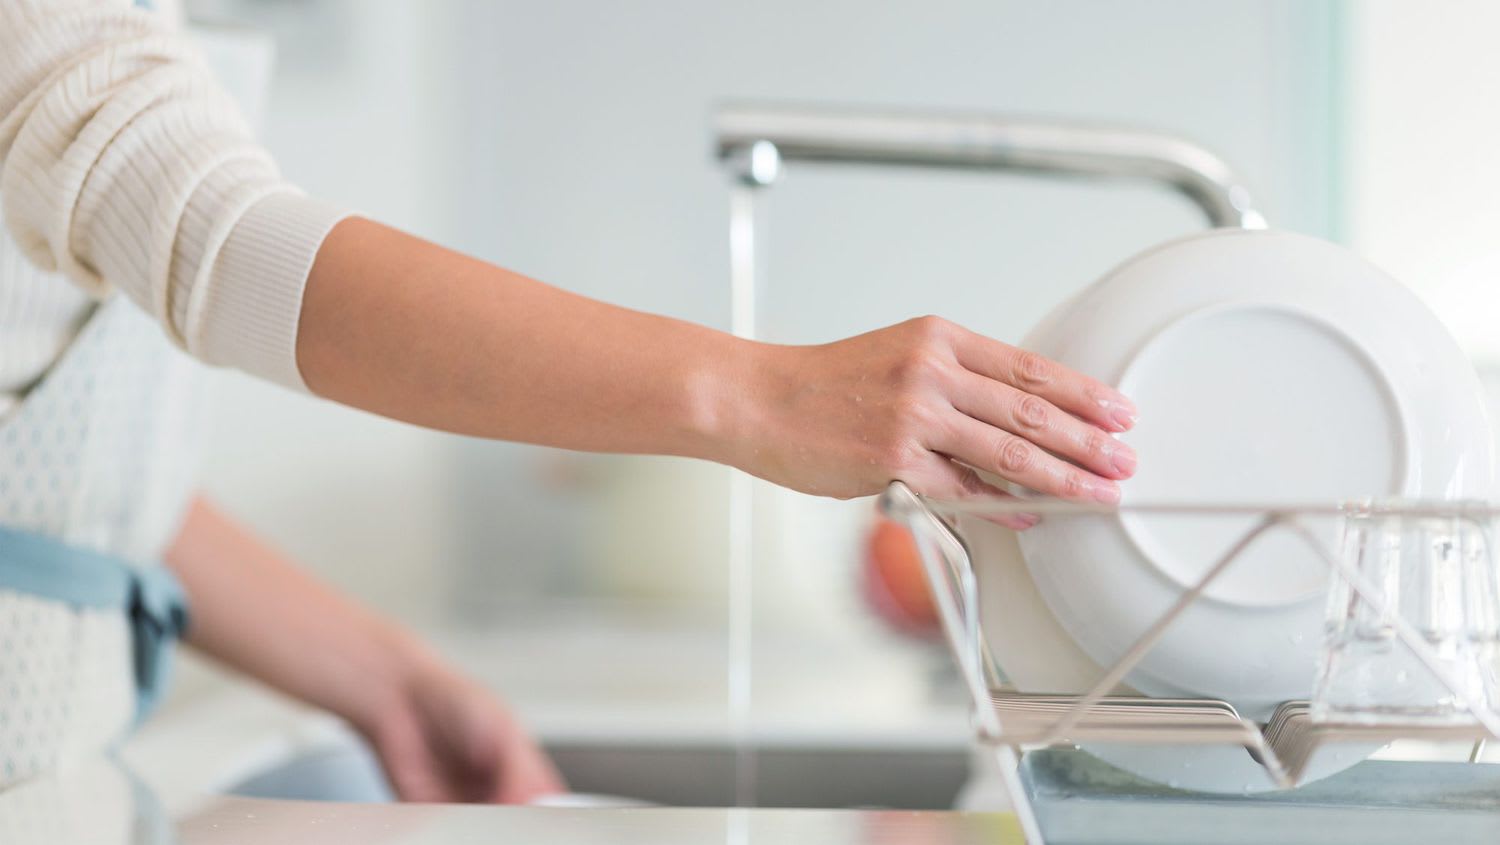 The Best Way to Dry Dishes—and Most Sanitary Method!